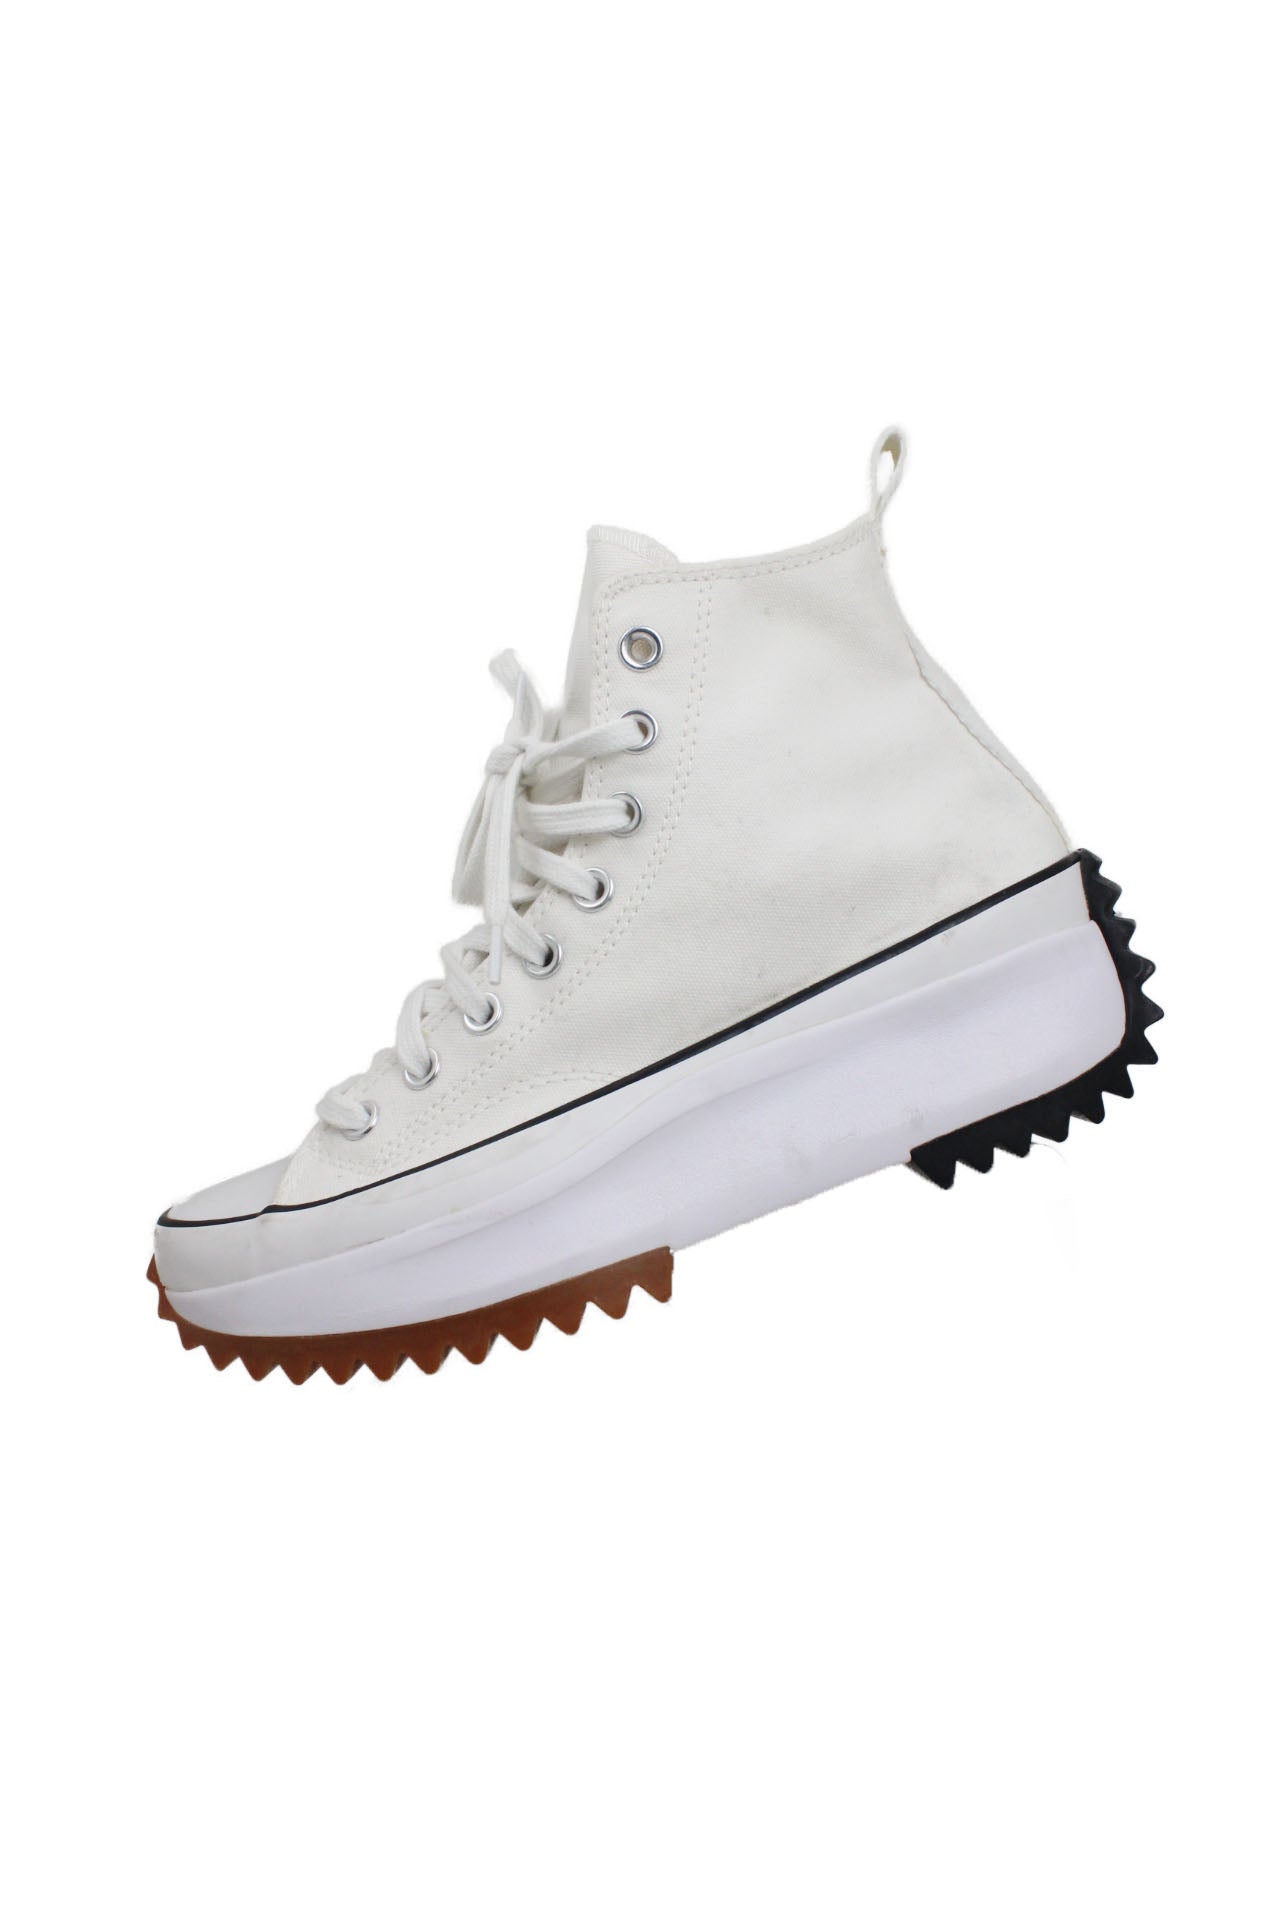 profile of converse white platform high top chuck taylor sneakers. off-white tone canvas upper. lace up closure. chunky 2" platform with toothed tread soles.  